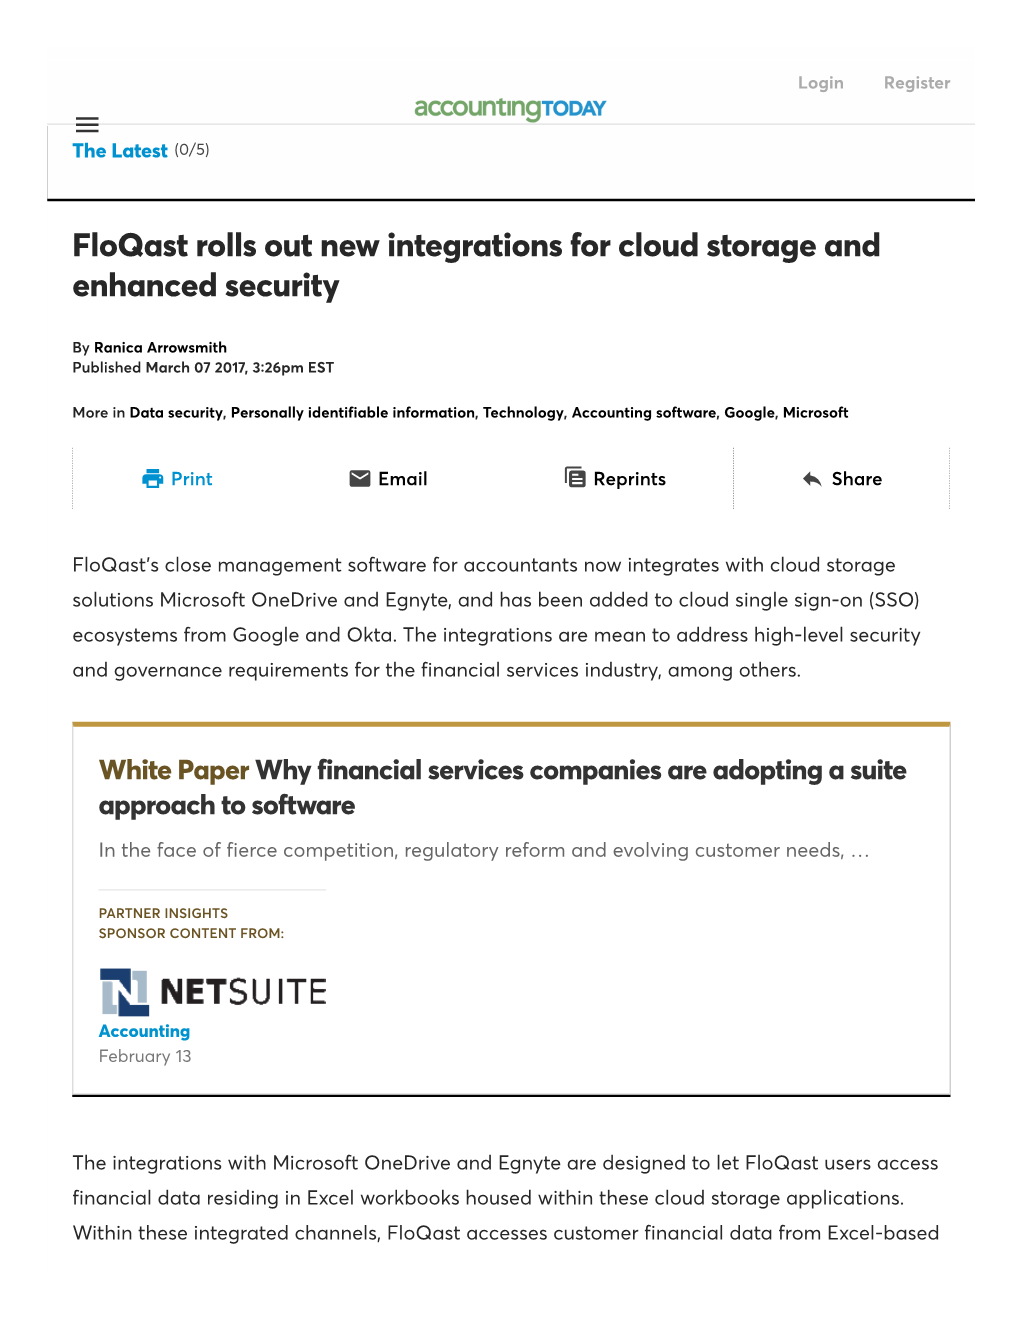 Floqast Rolls out New Integrations for ...D Enhanced Security | Accounting Today